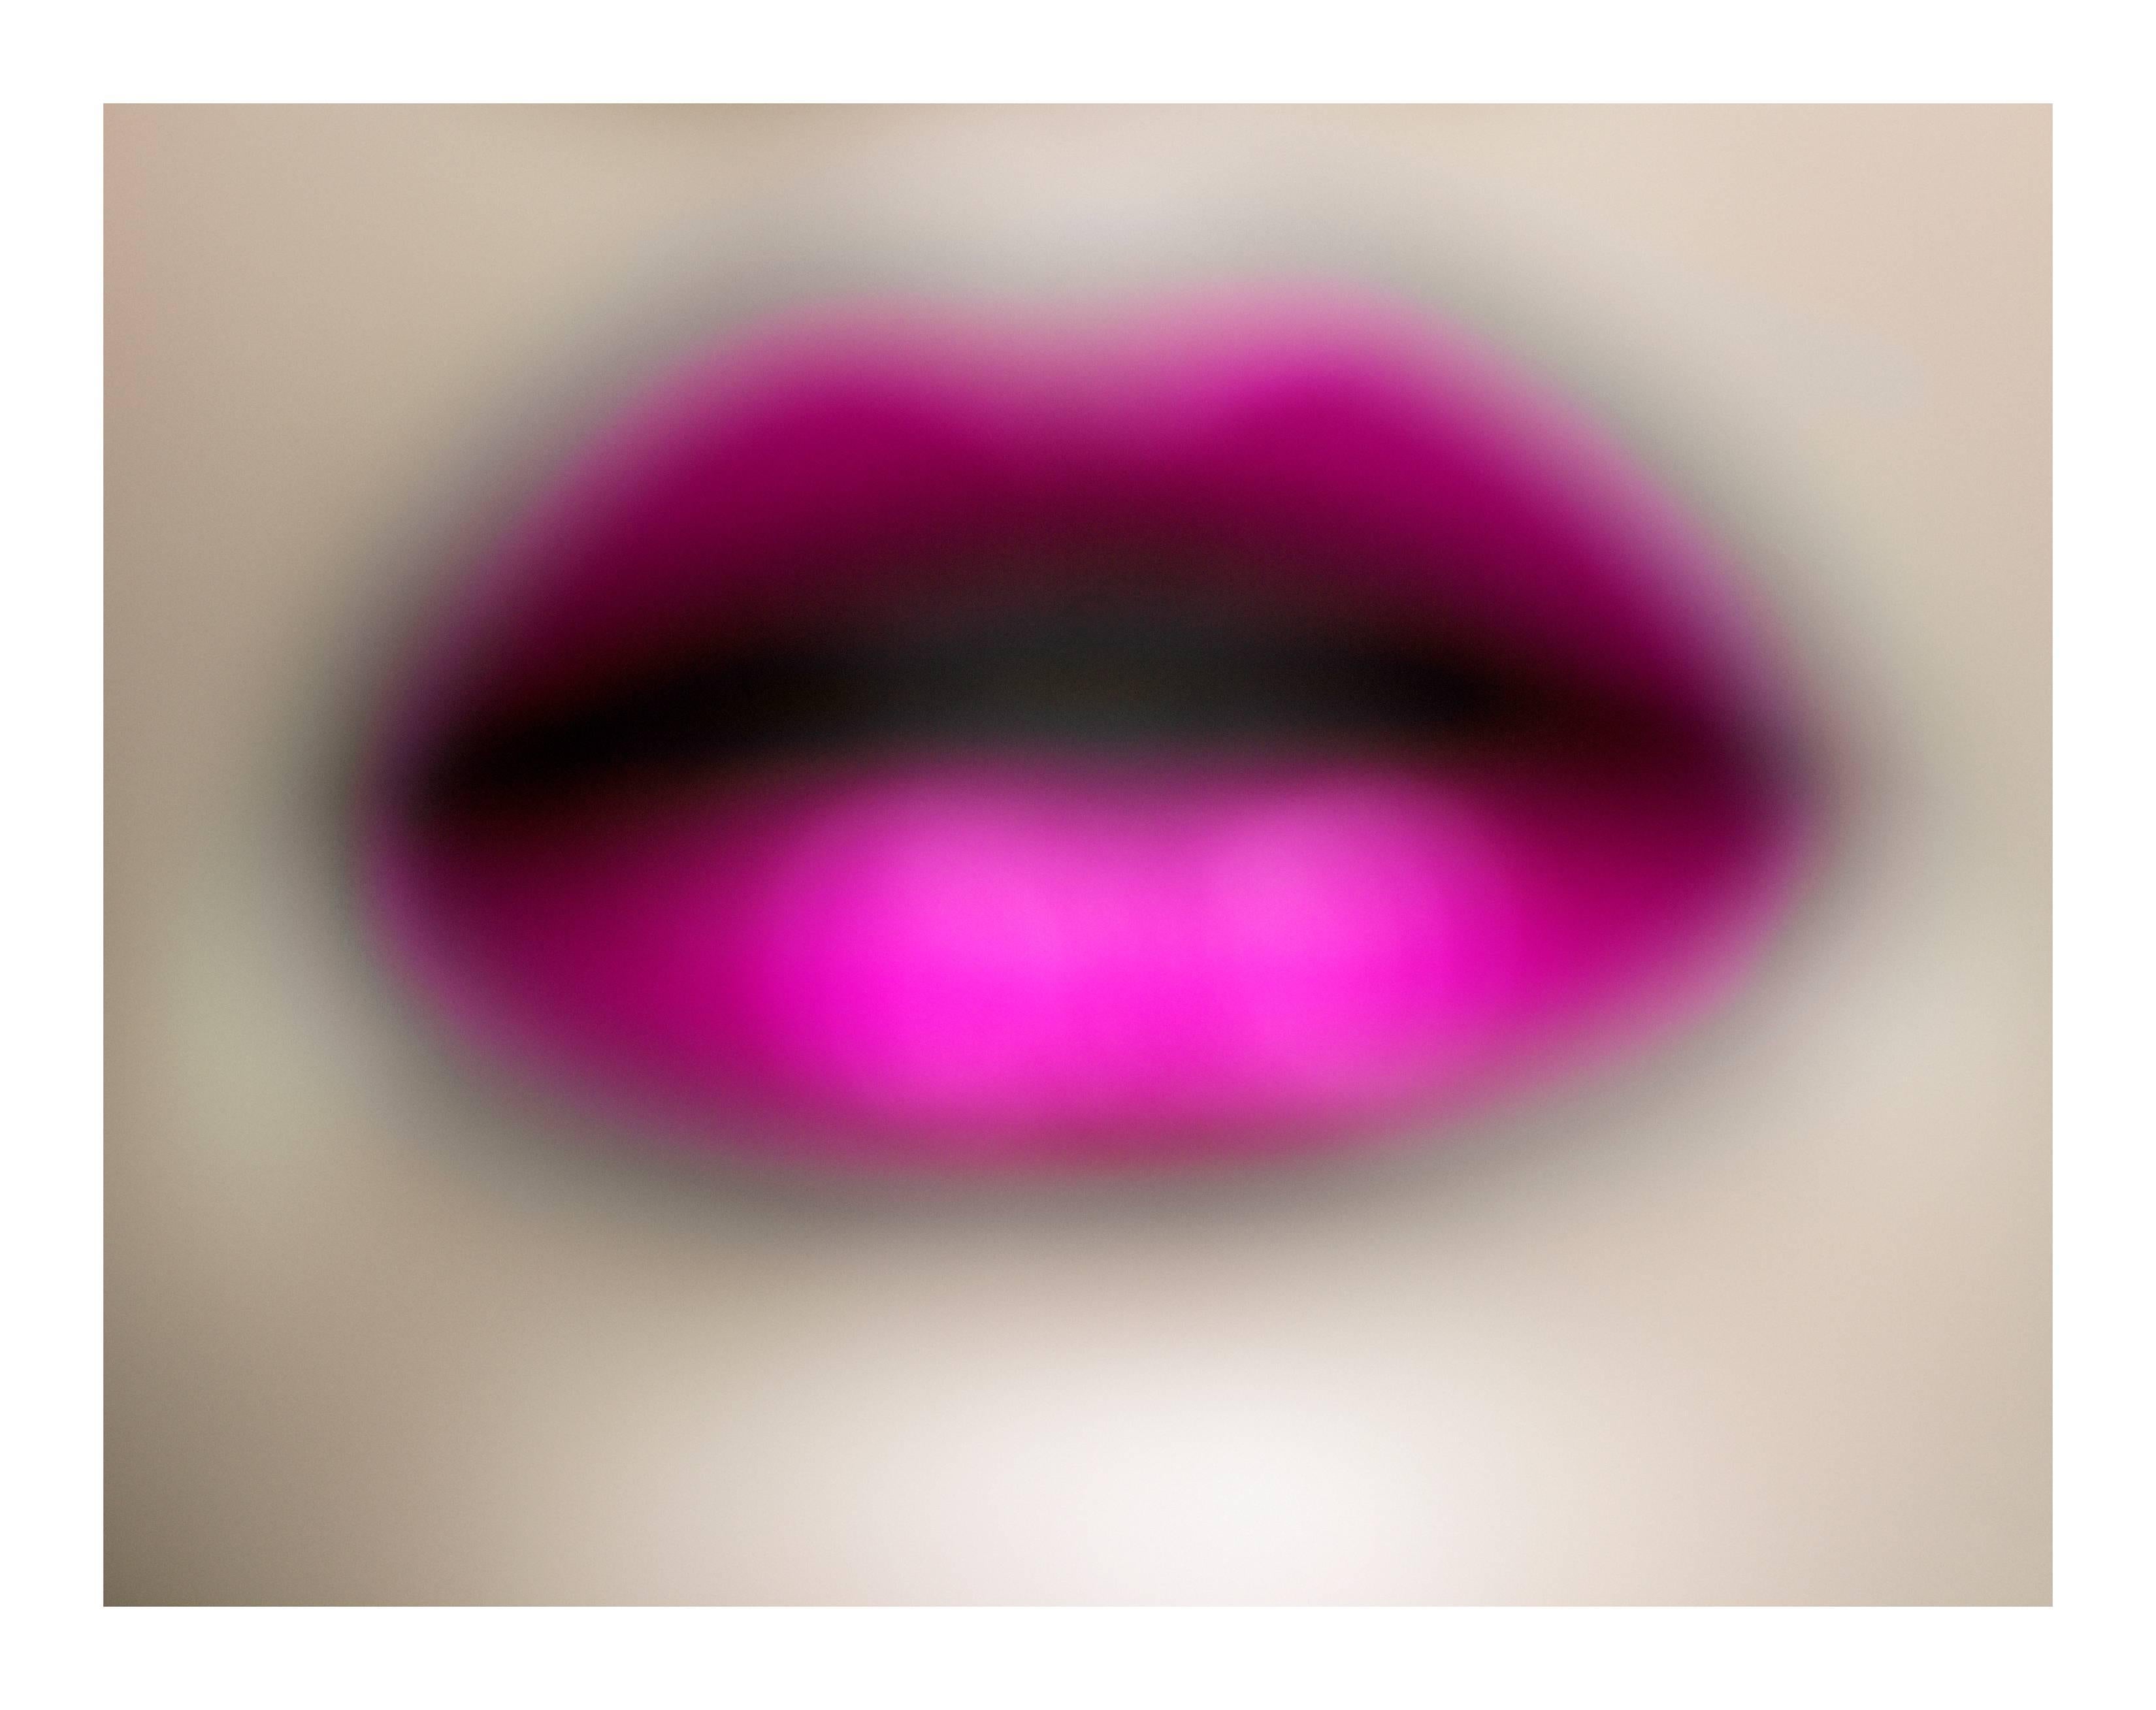 Alistair Taylor-Young Color Photograph - Pink Lips